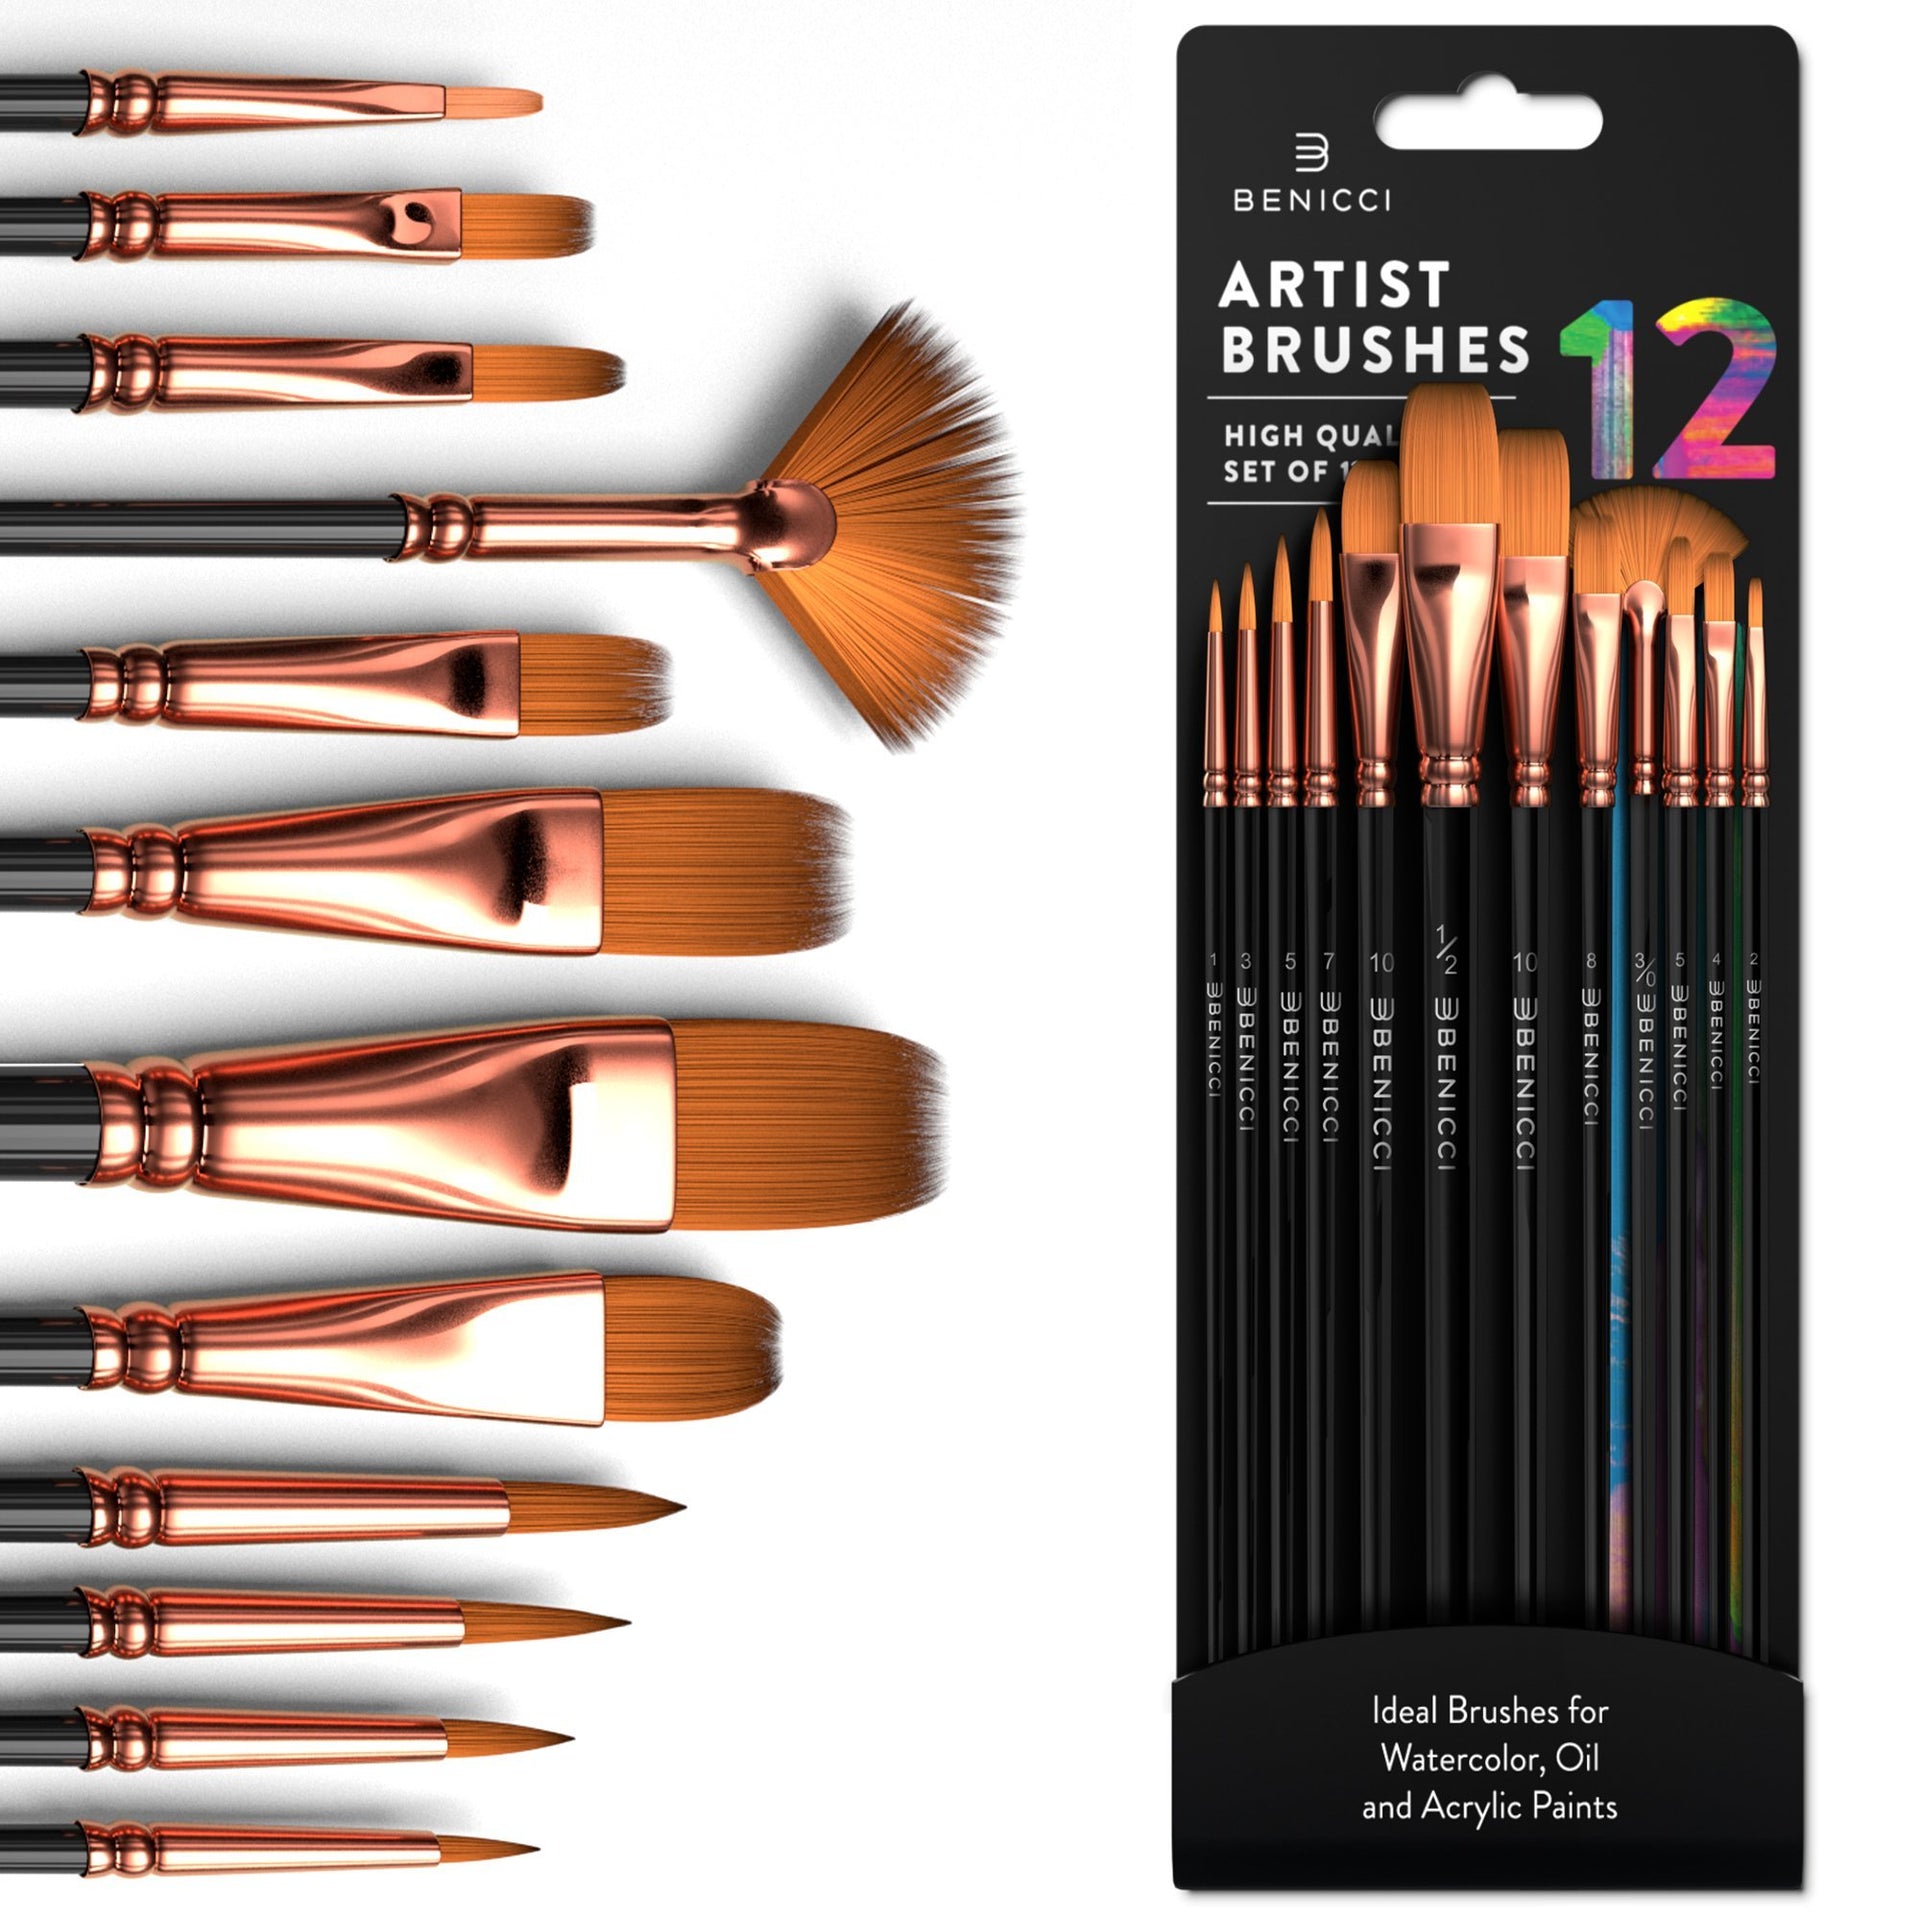 Disposable Brushes for Cement, Dye, Paint - Craft Brush Set - 12 Pack